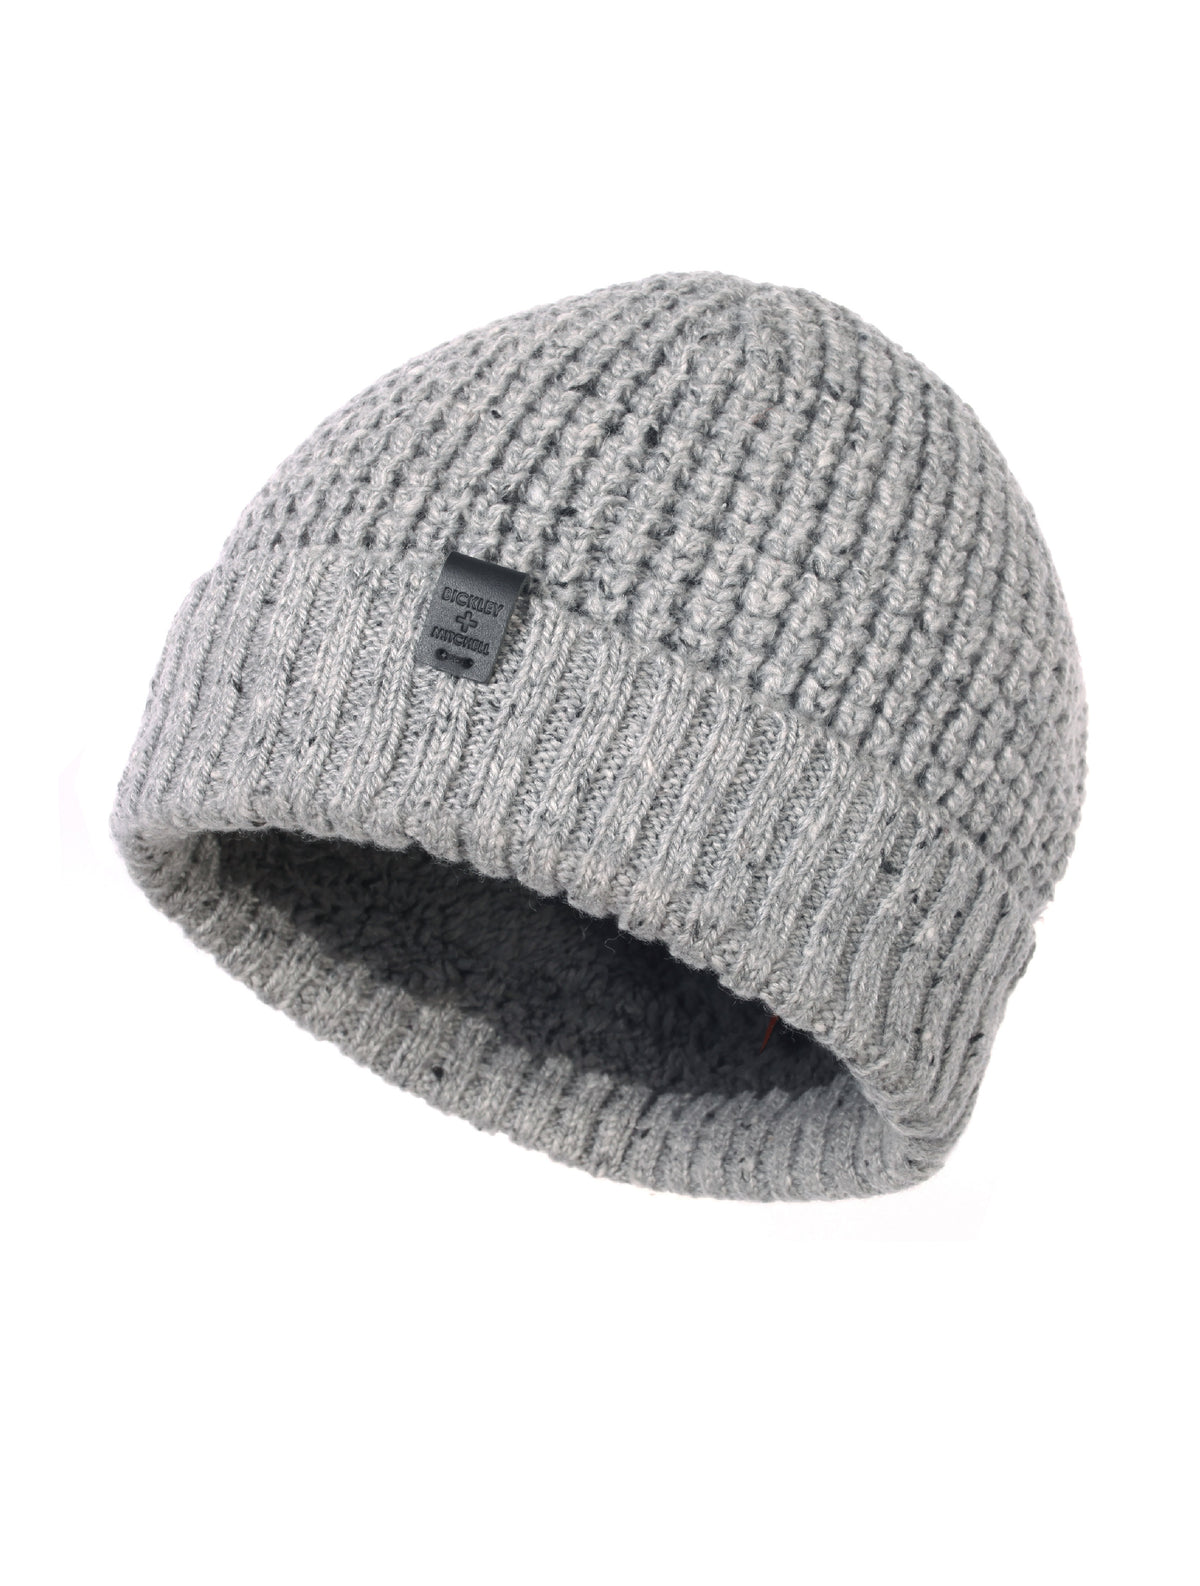 Bickley + Mitchell Sherpa Lined Thick Knit Cuffed Beanie